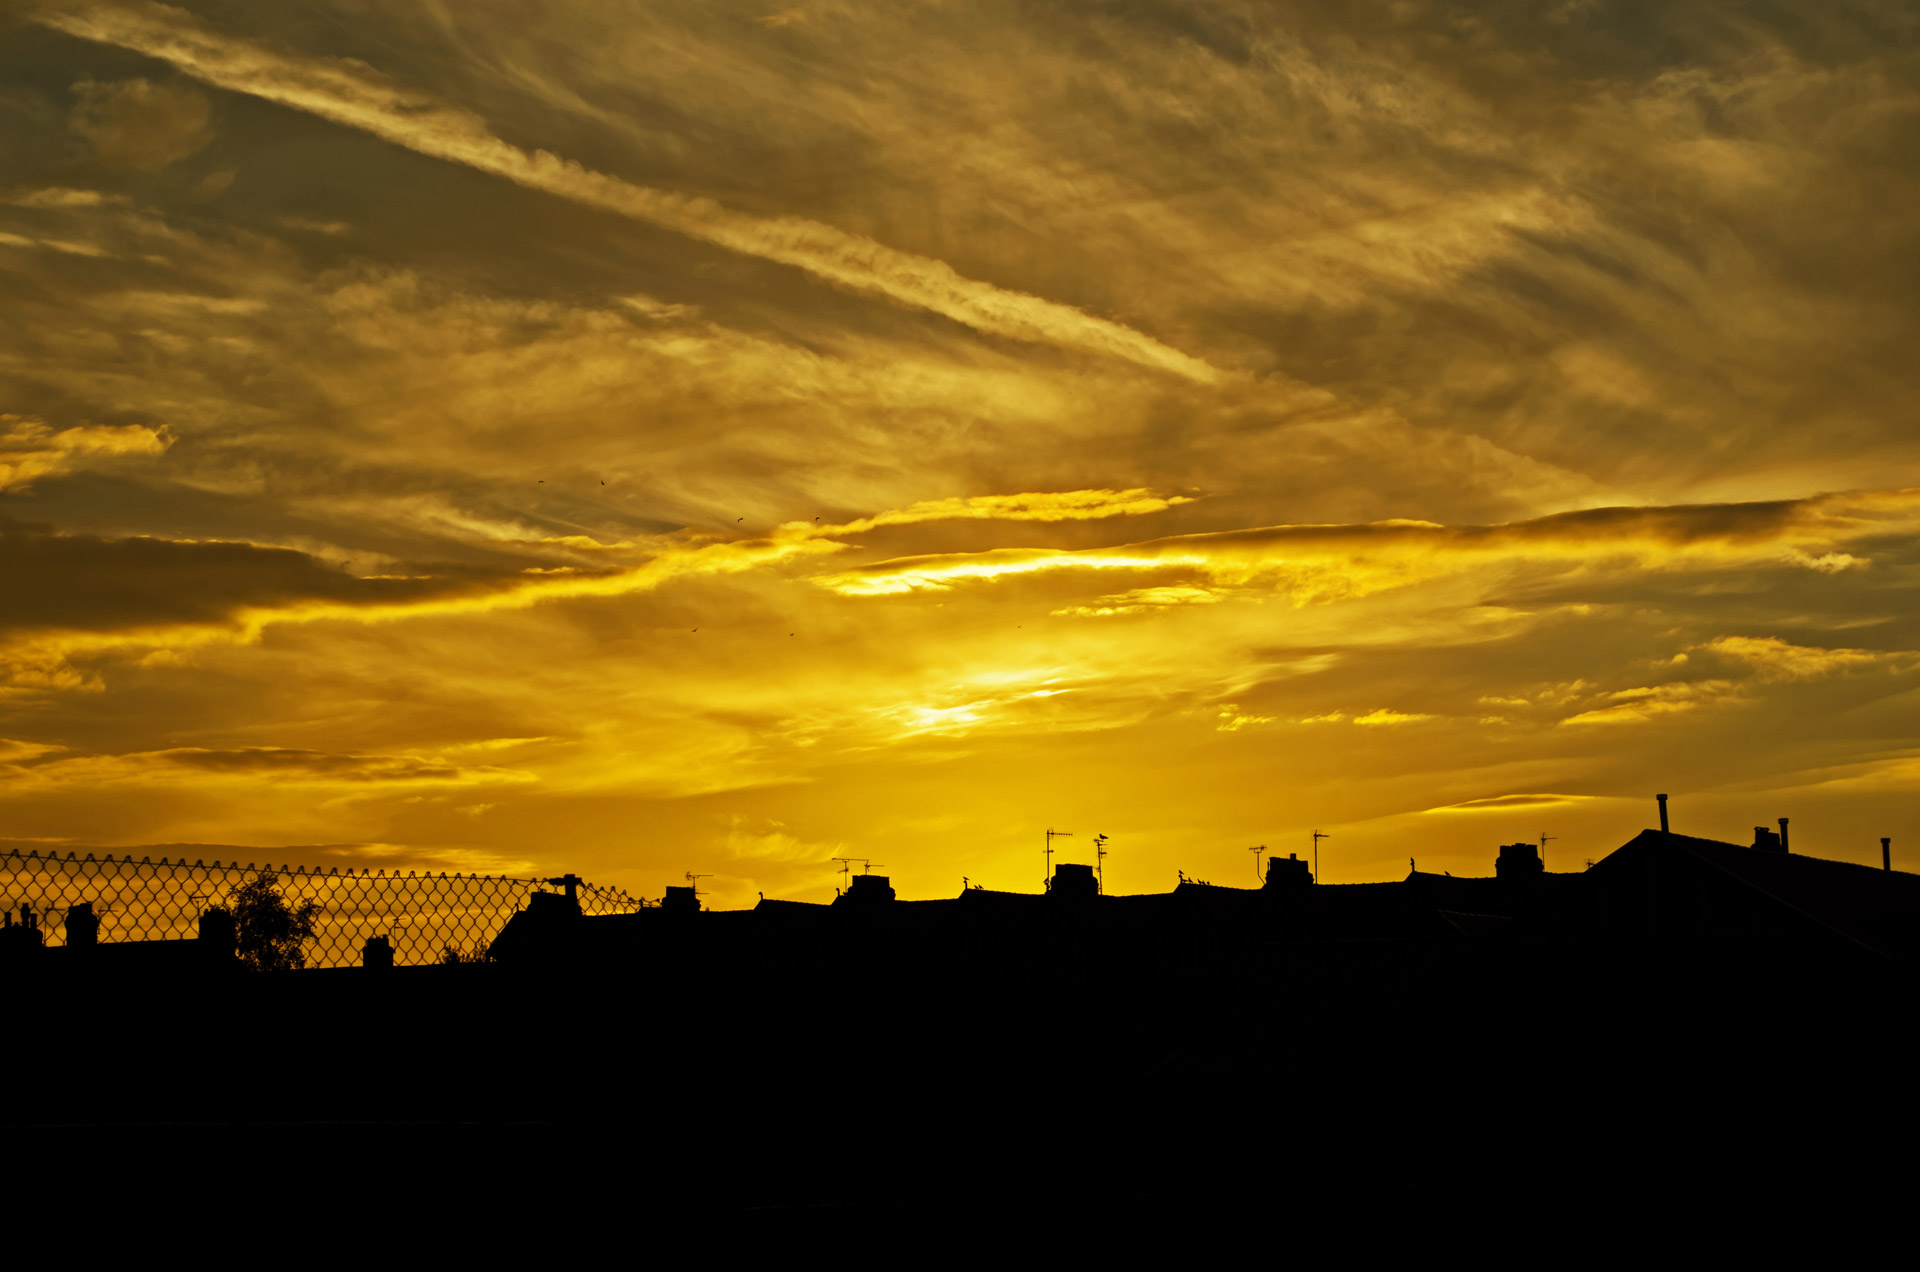 sunset,background,houses,house,city,england,evening,orange,red,night,nature,sun,clouds,cloudy,weather,sunset,free pictures, free photos, free images, royalty free, free illustrations, public domain